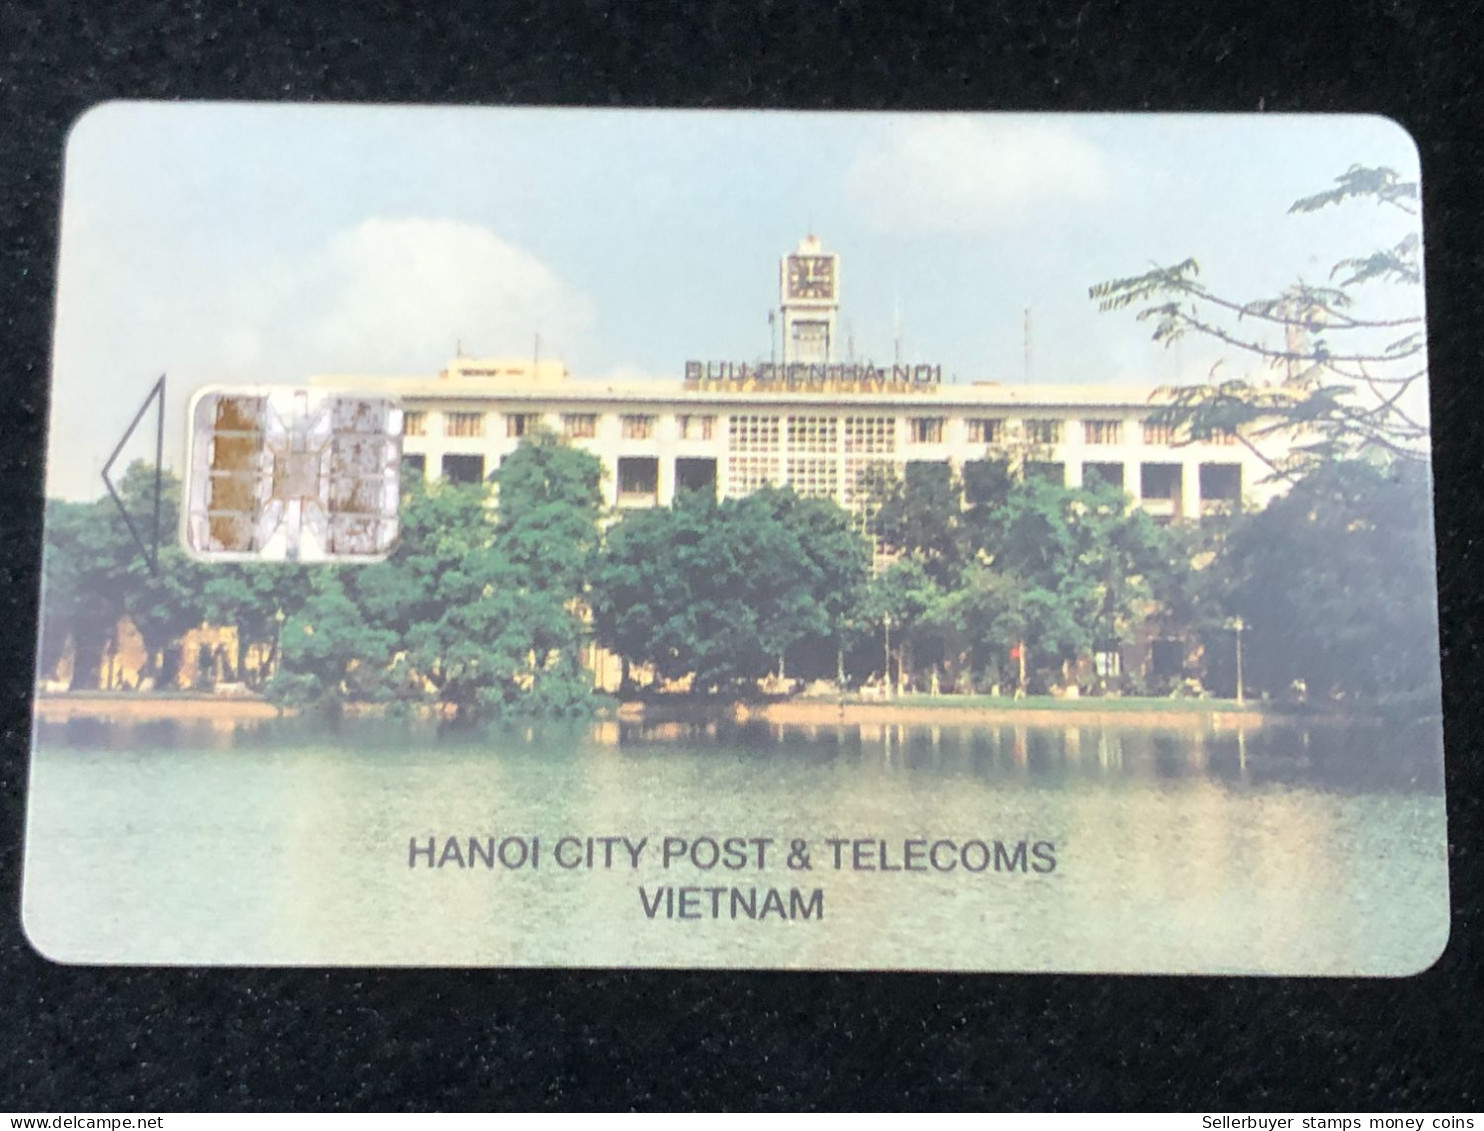 Vietnam This Is A Vietnamese Cardphone Card From 2001 And 2005(buu Dien Ha Noi- 40 000dong Not Released Rare)-1pcs - Vietnam